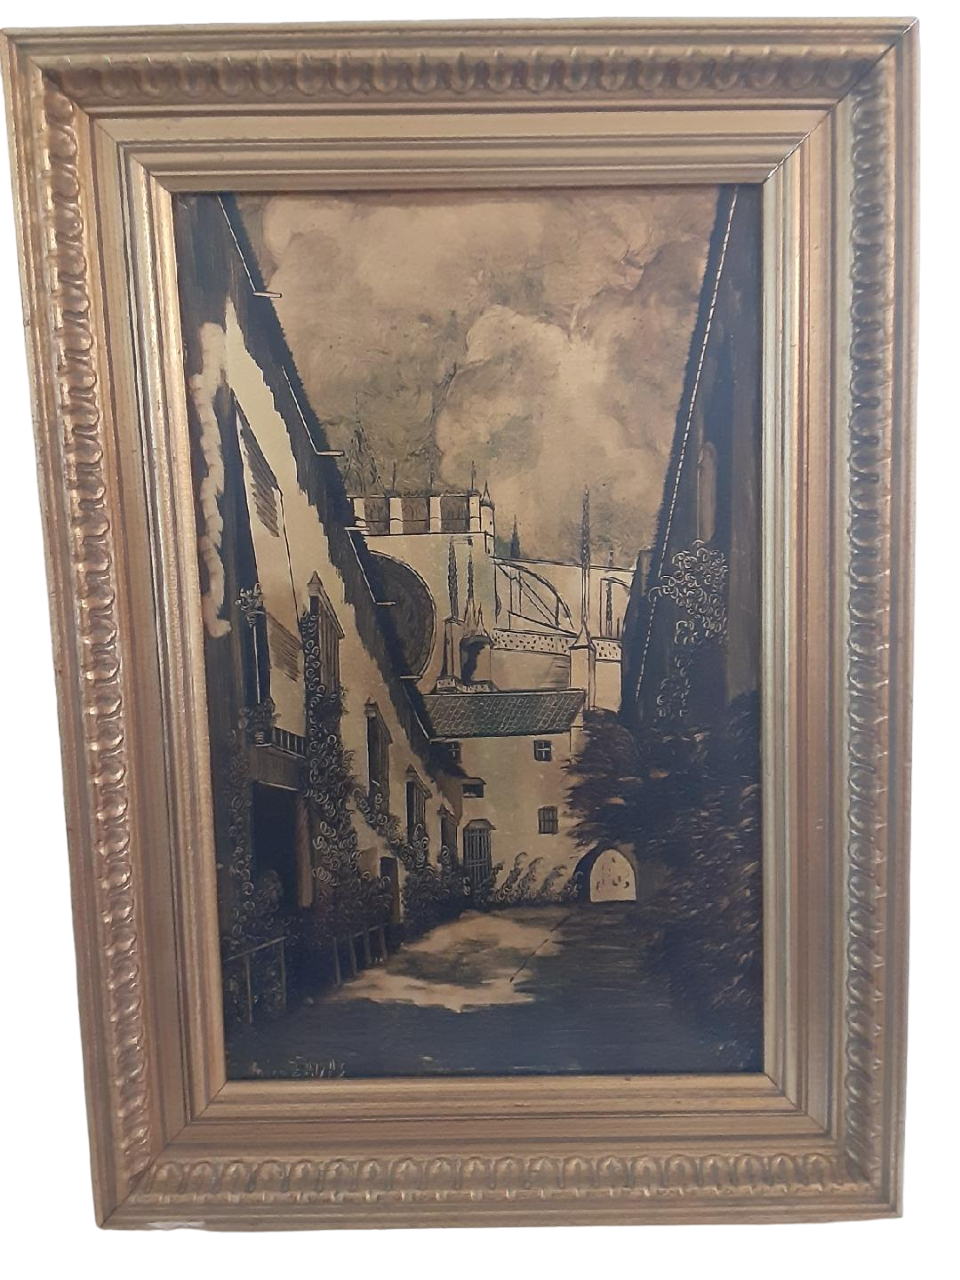 Golden Style Painting Signed by Artist Front with Frame